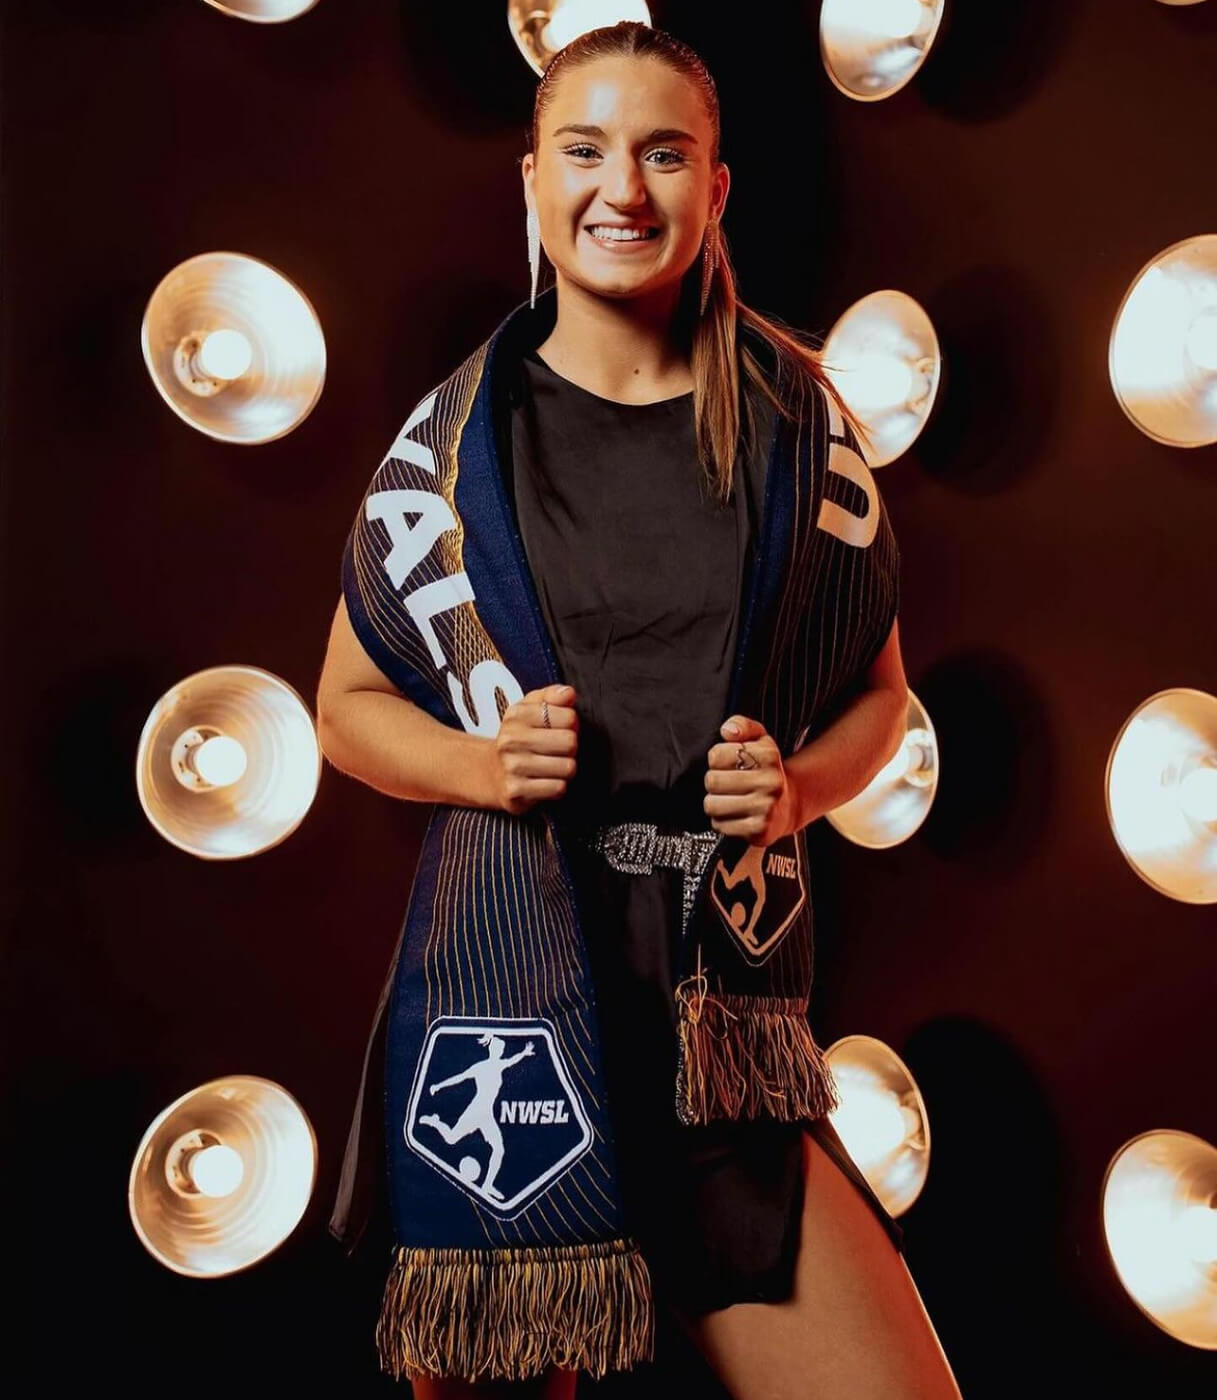 NWSL soccer scarf tradition